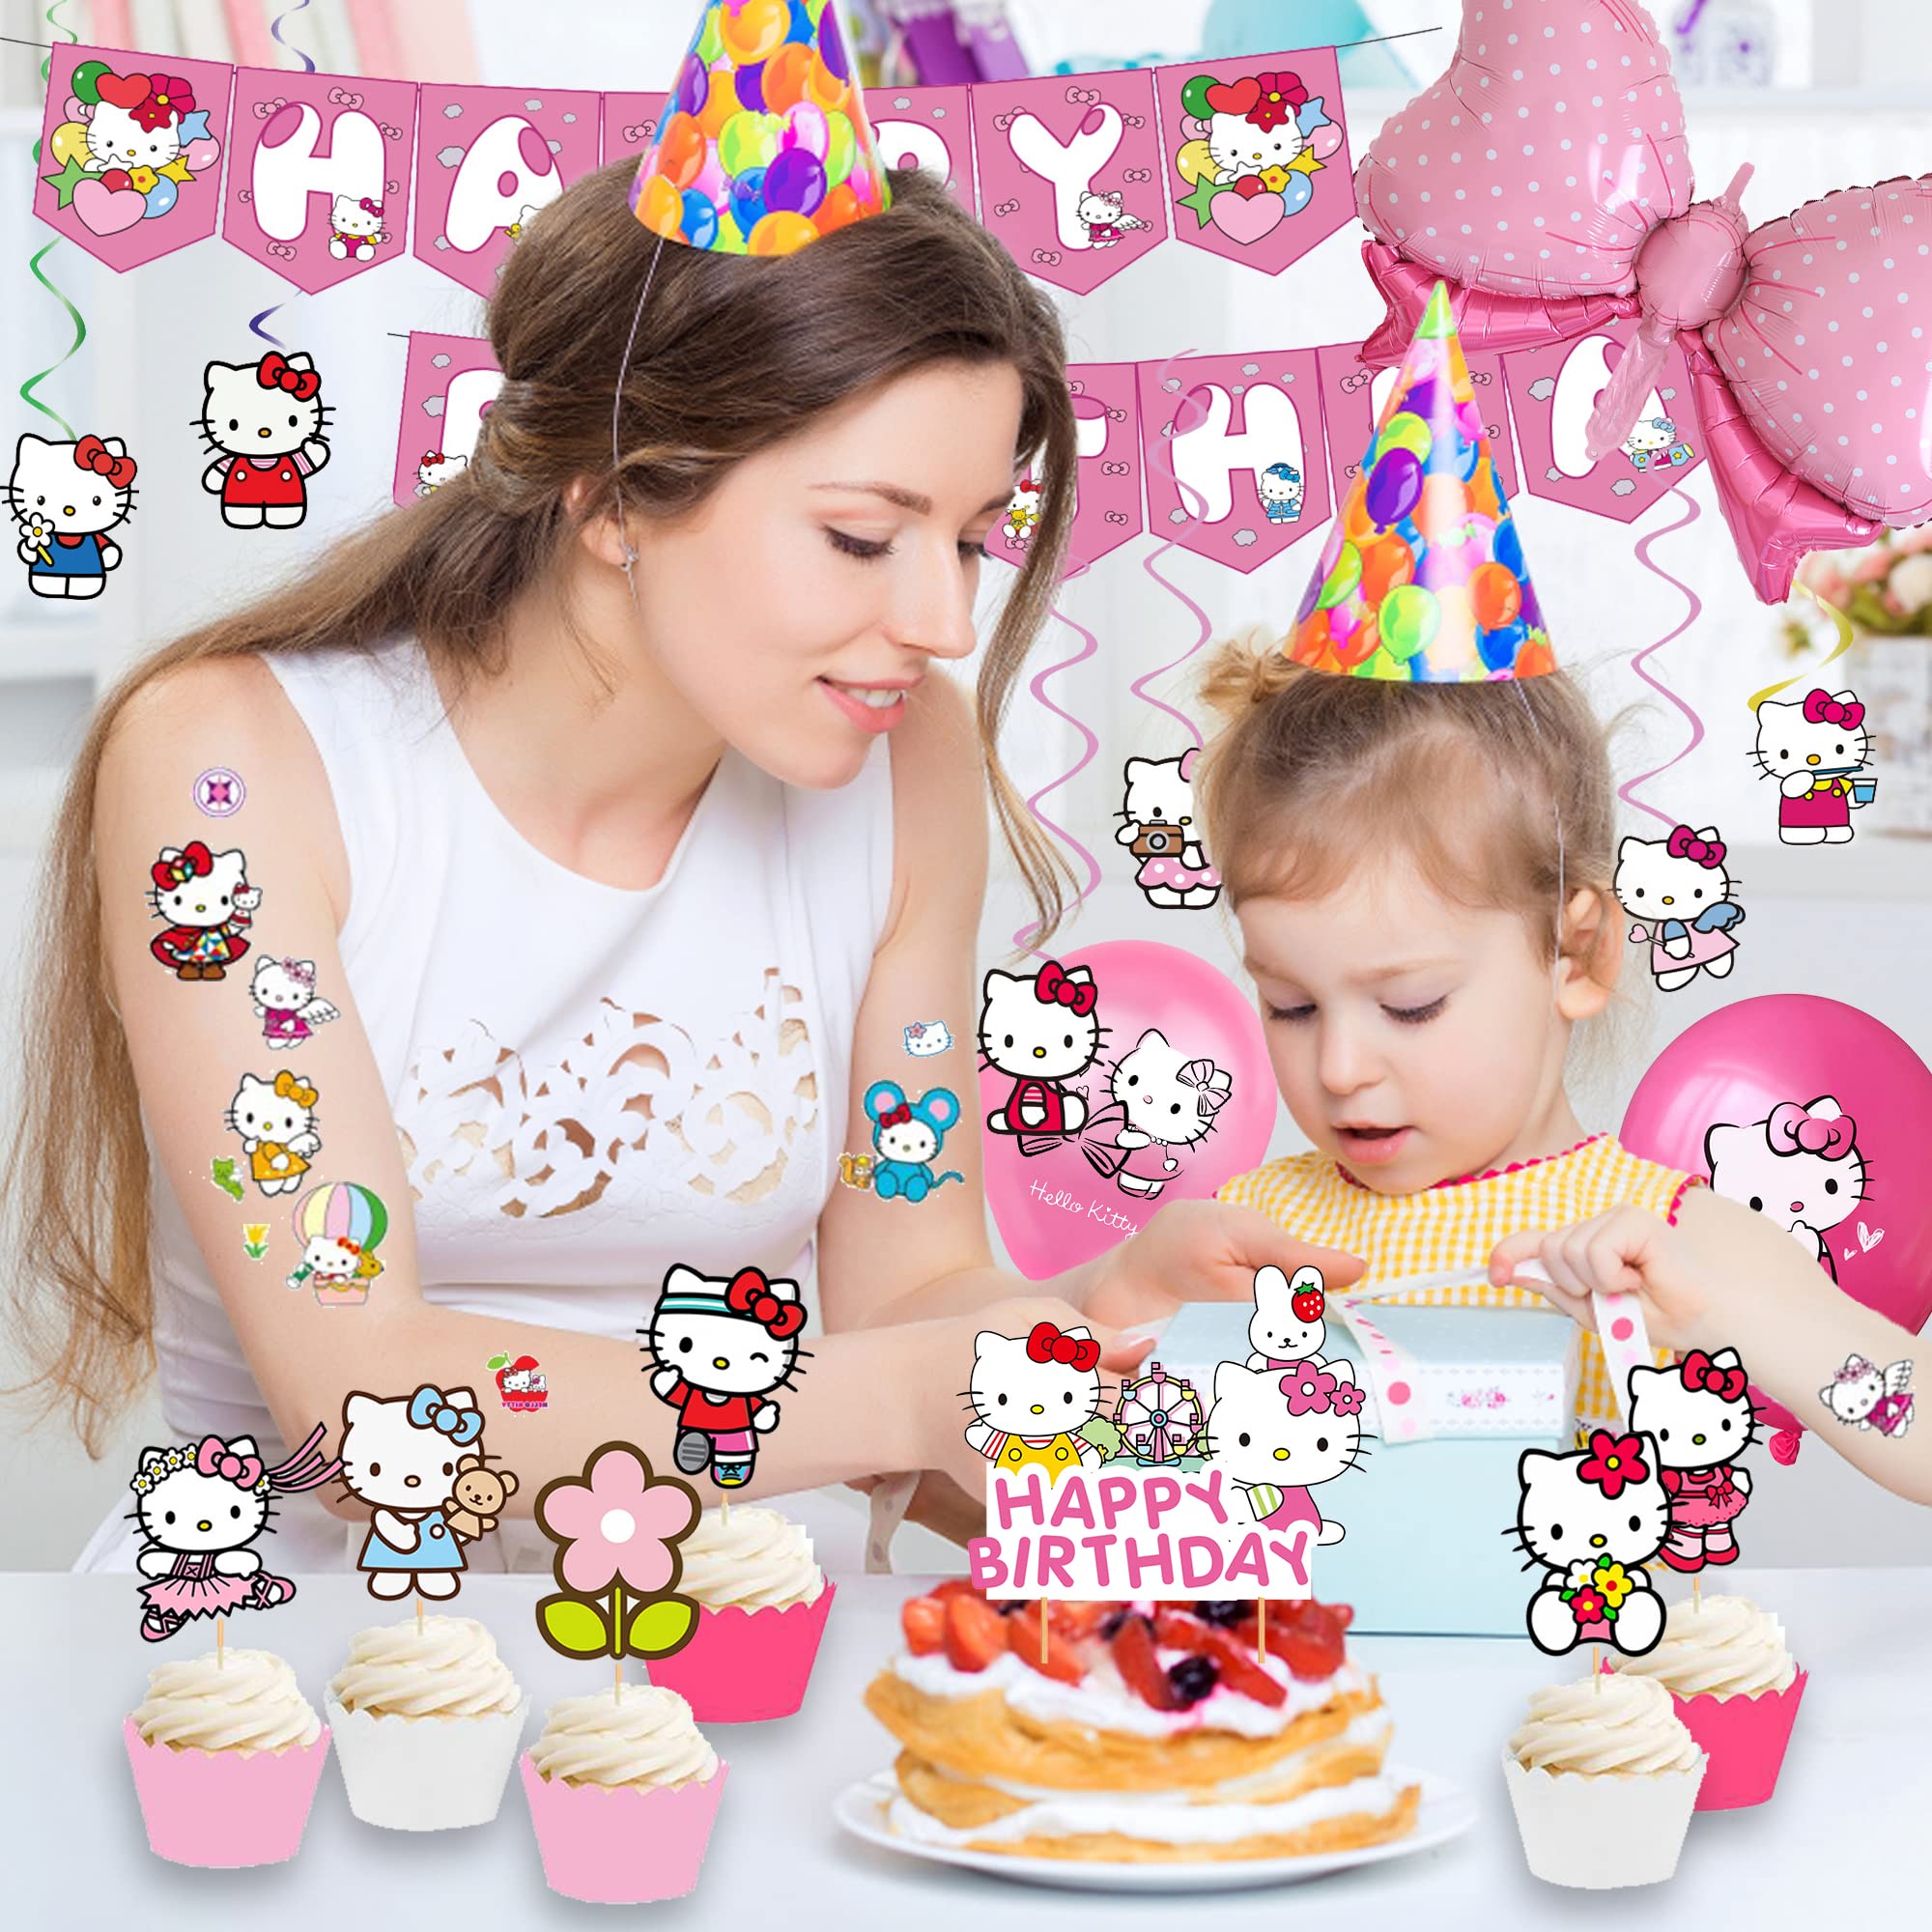 Kitty Birthday Party Supplies, Cute Kitten Party Favor Pink Party Decorations includes Happy Birthday Banner, Balloons, Cake Topper, Kitten Foils Balloons, Tattoos Stickers, Hanging Swirl